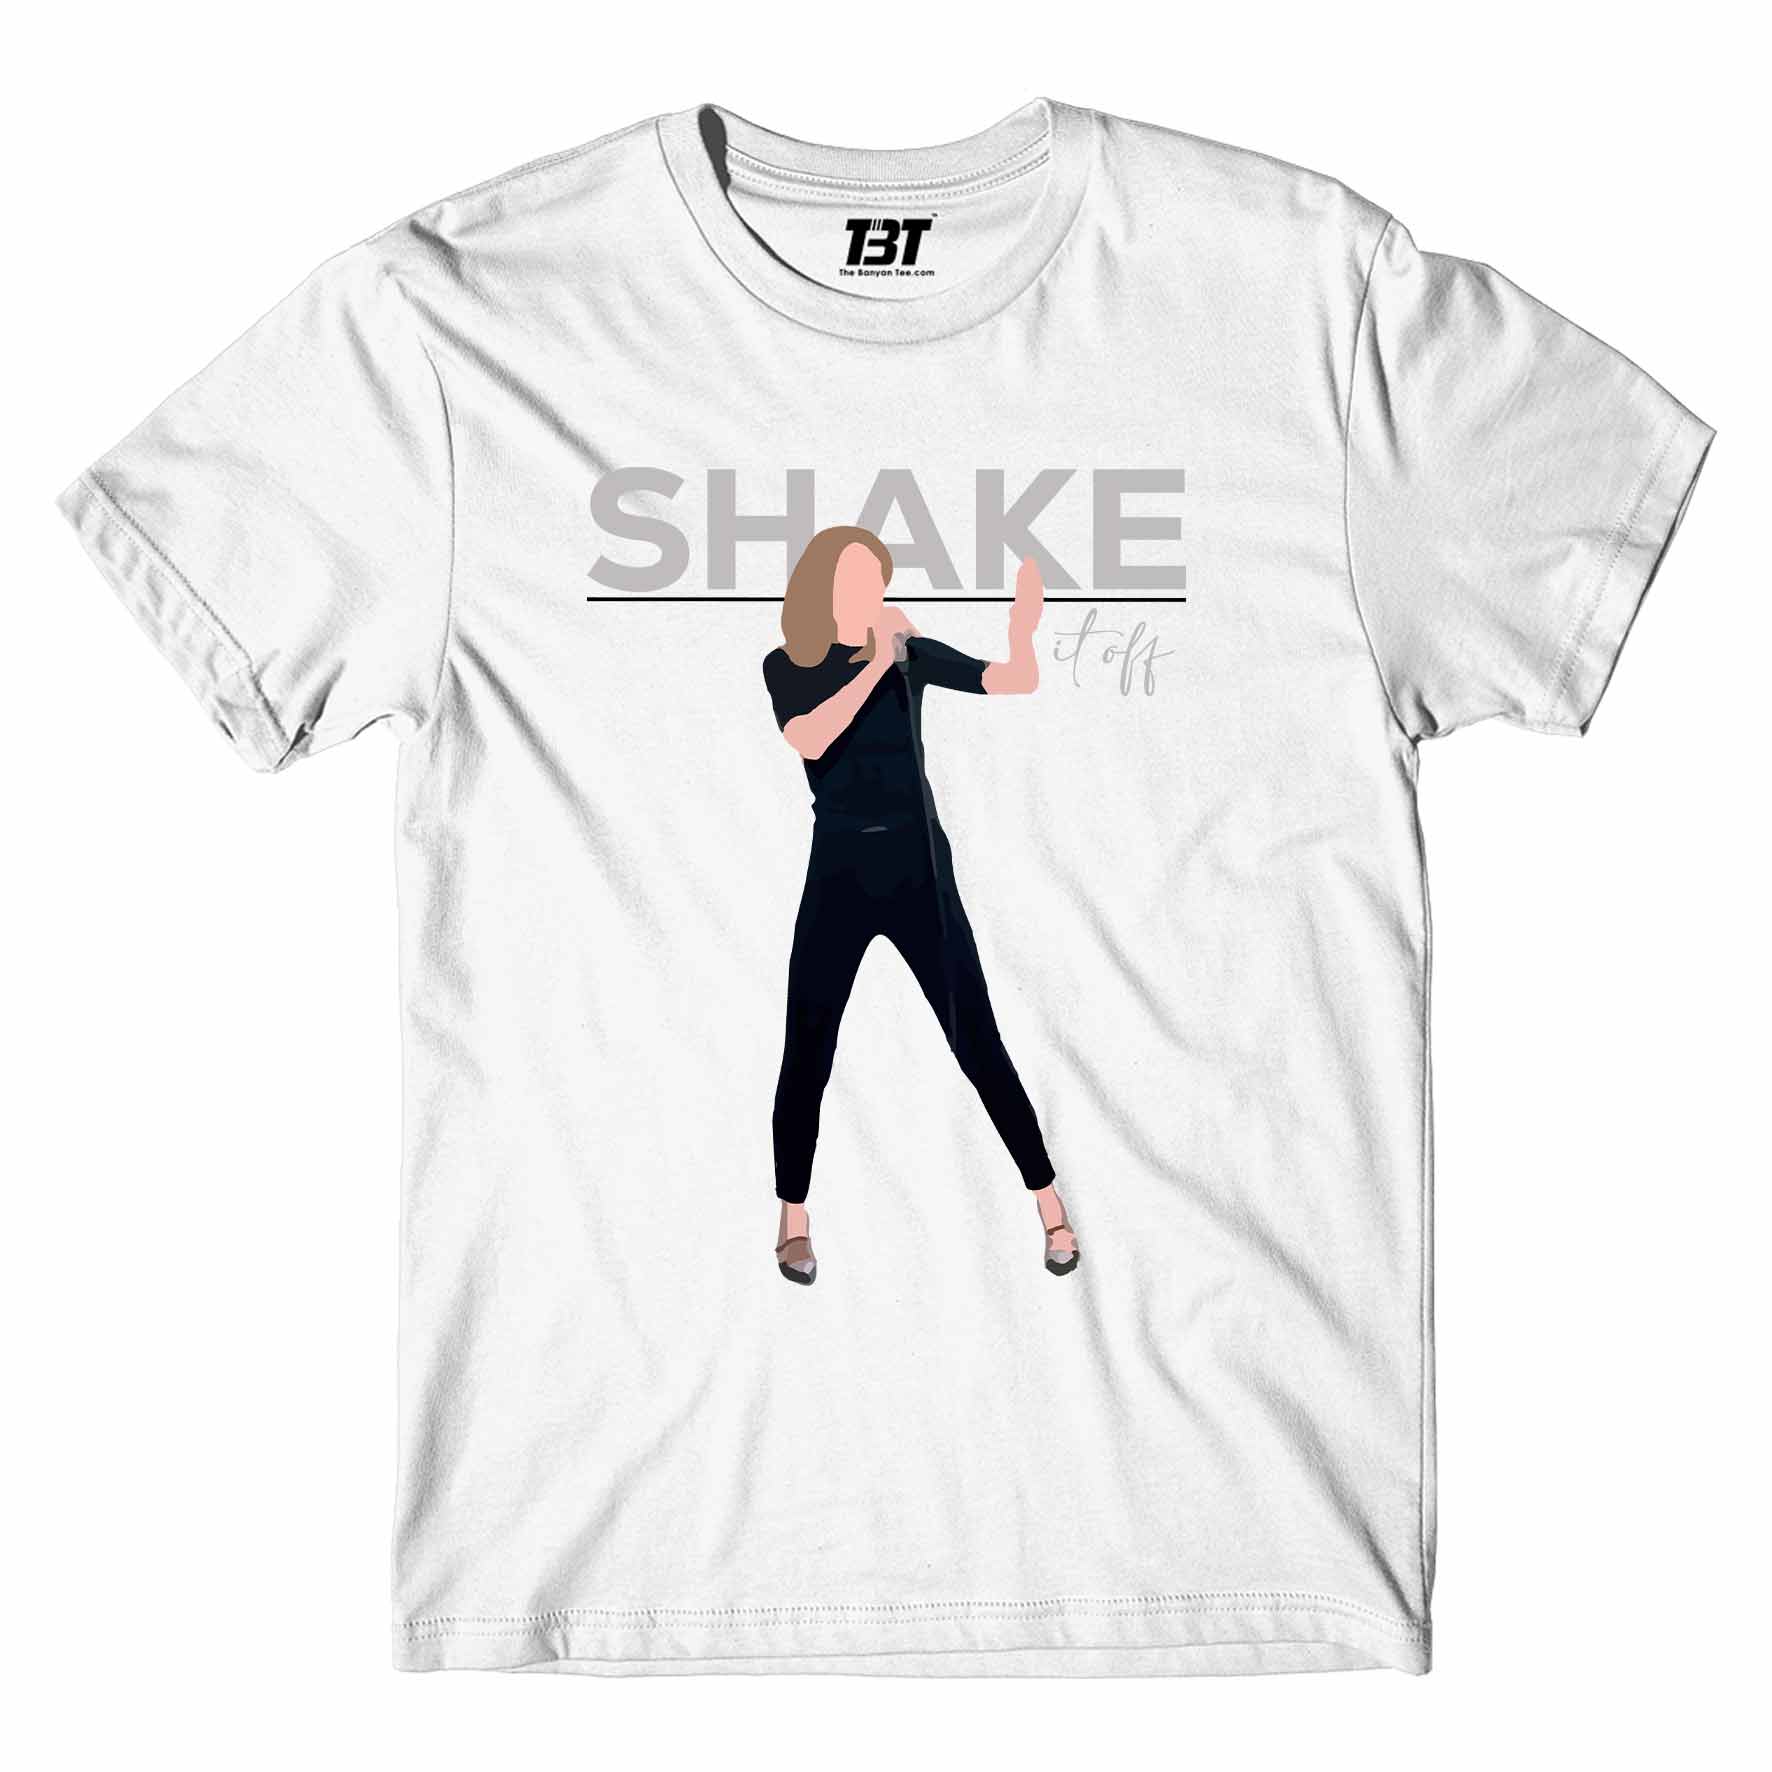 this is taylor swift shirt